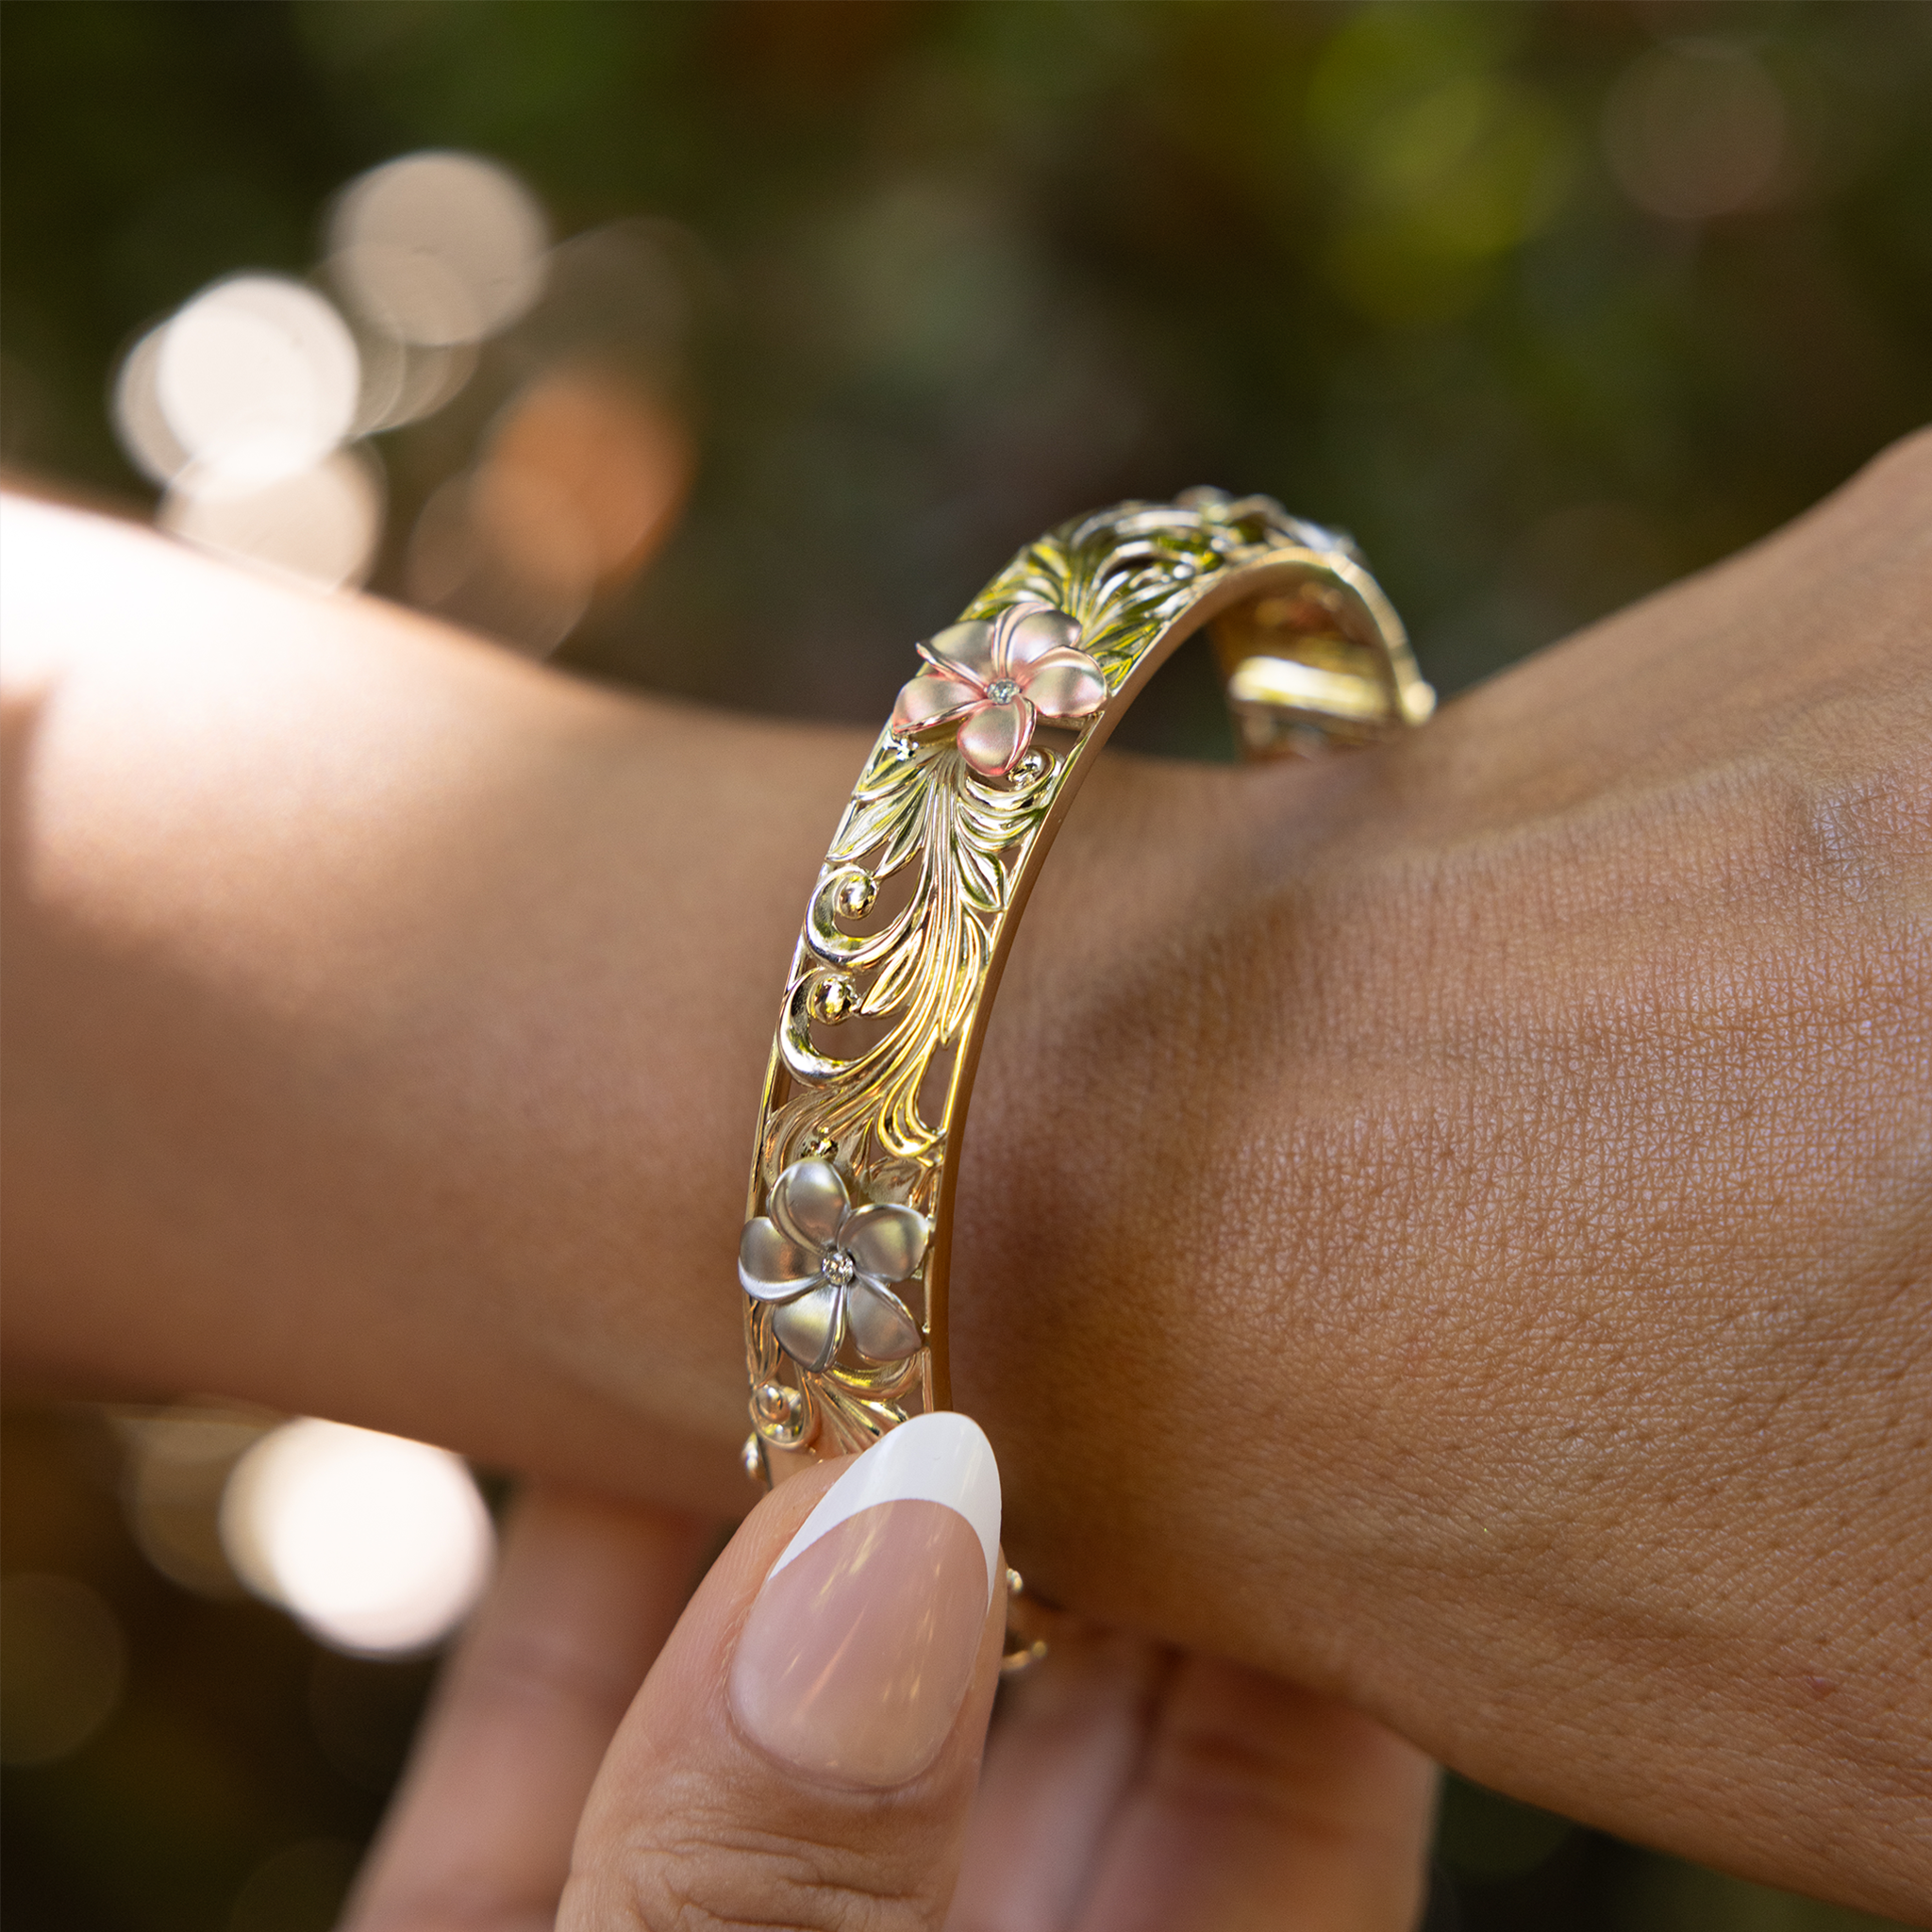 Close up of Hawaiian Heirloom Plumeria Hinge Bracelet in Tri Color Gold with Diamonds - 12mm on womanʻs wrist